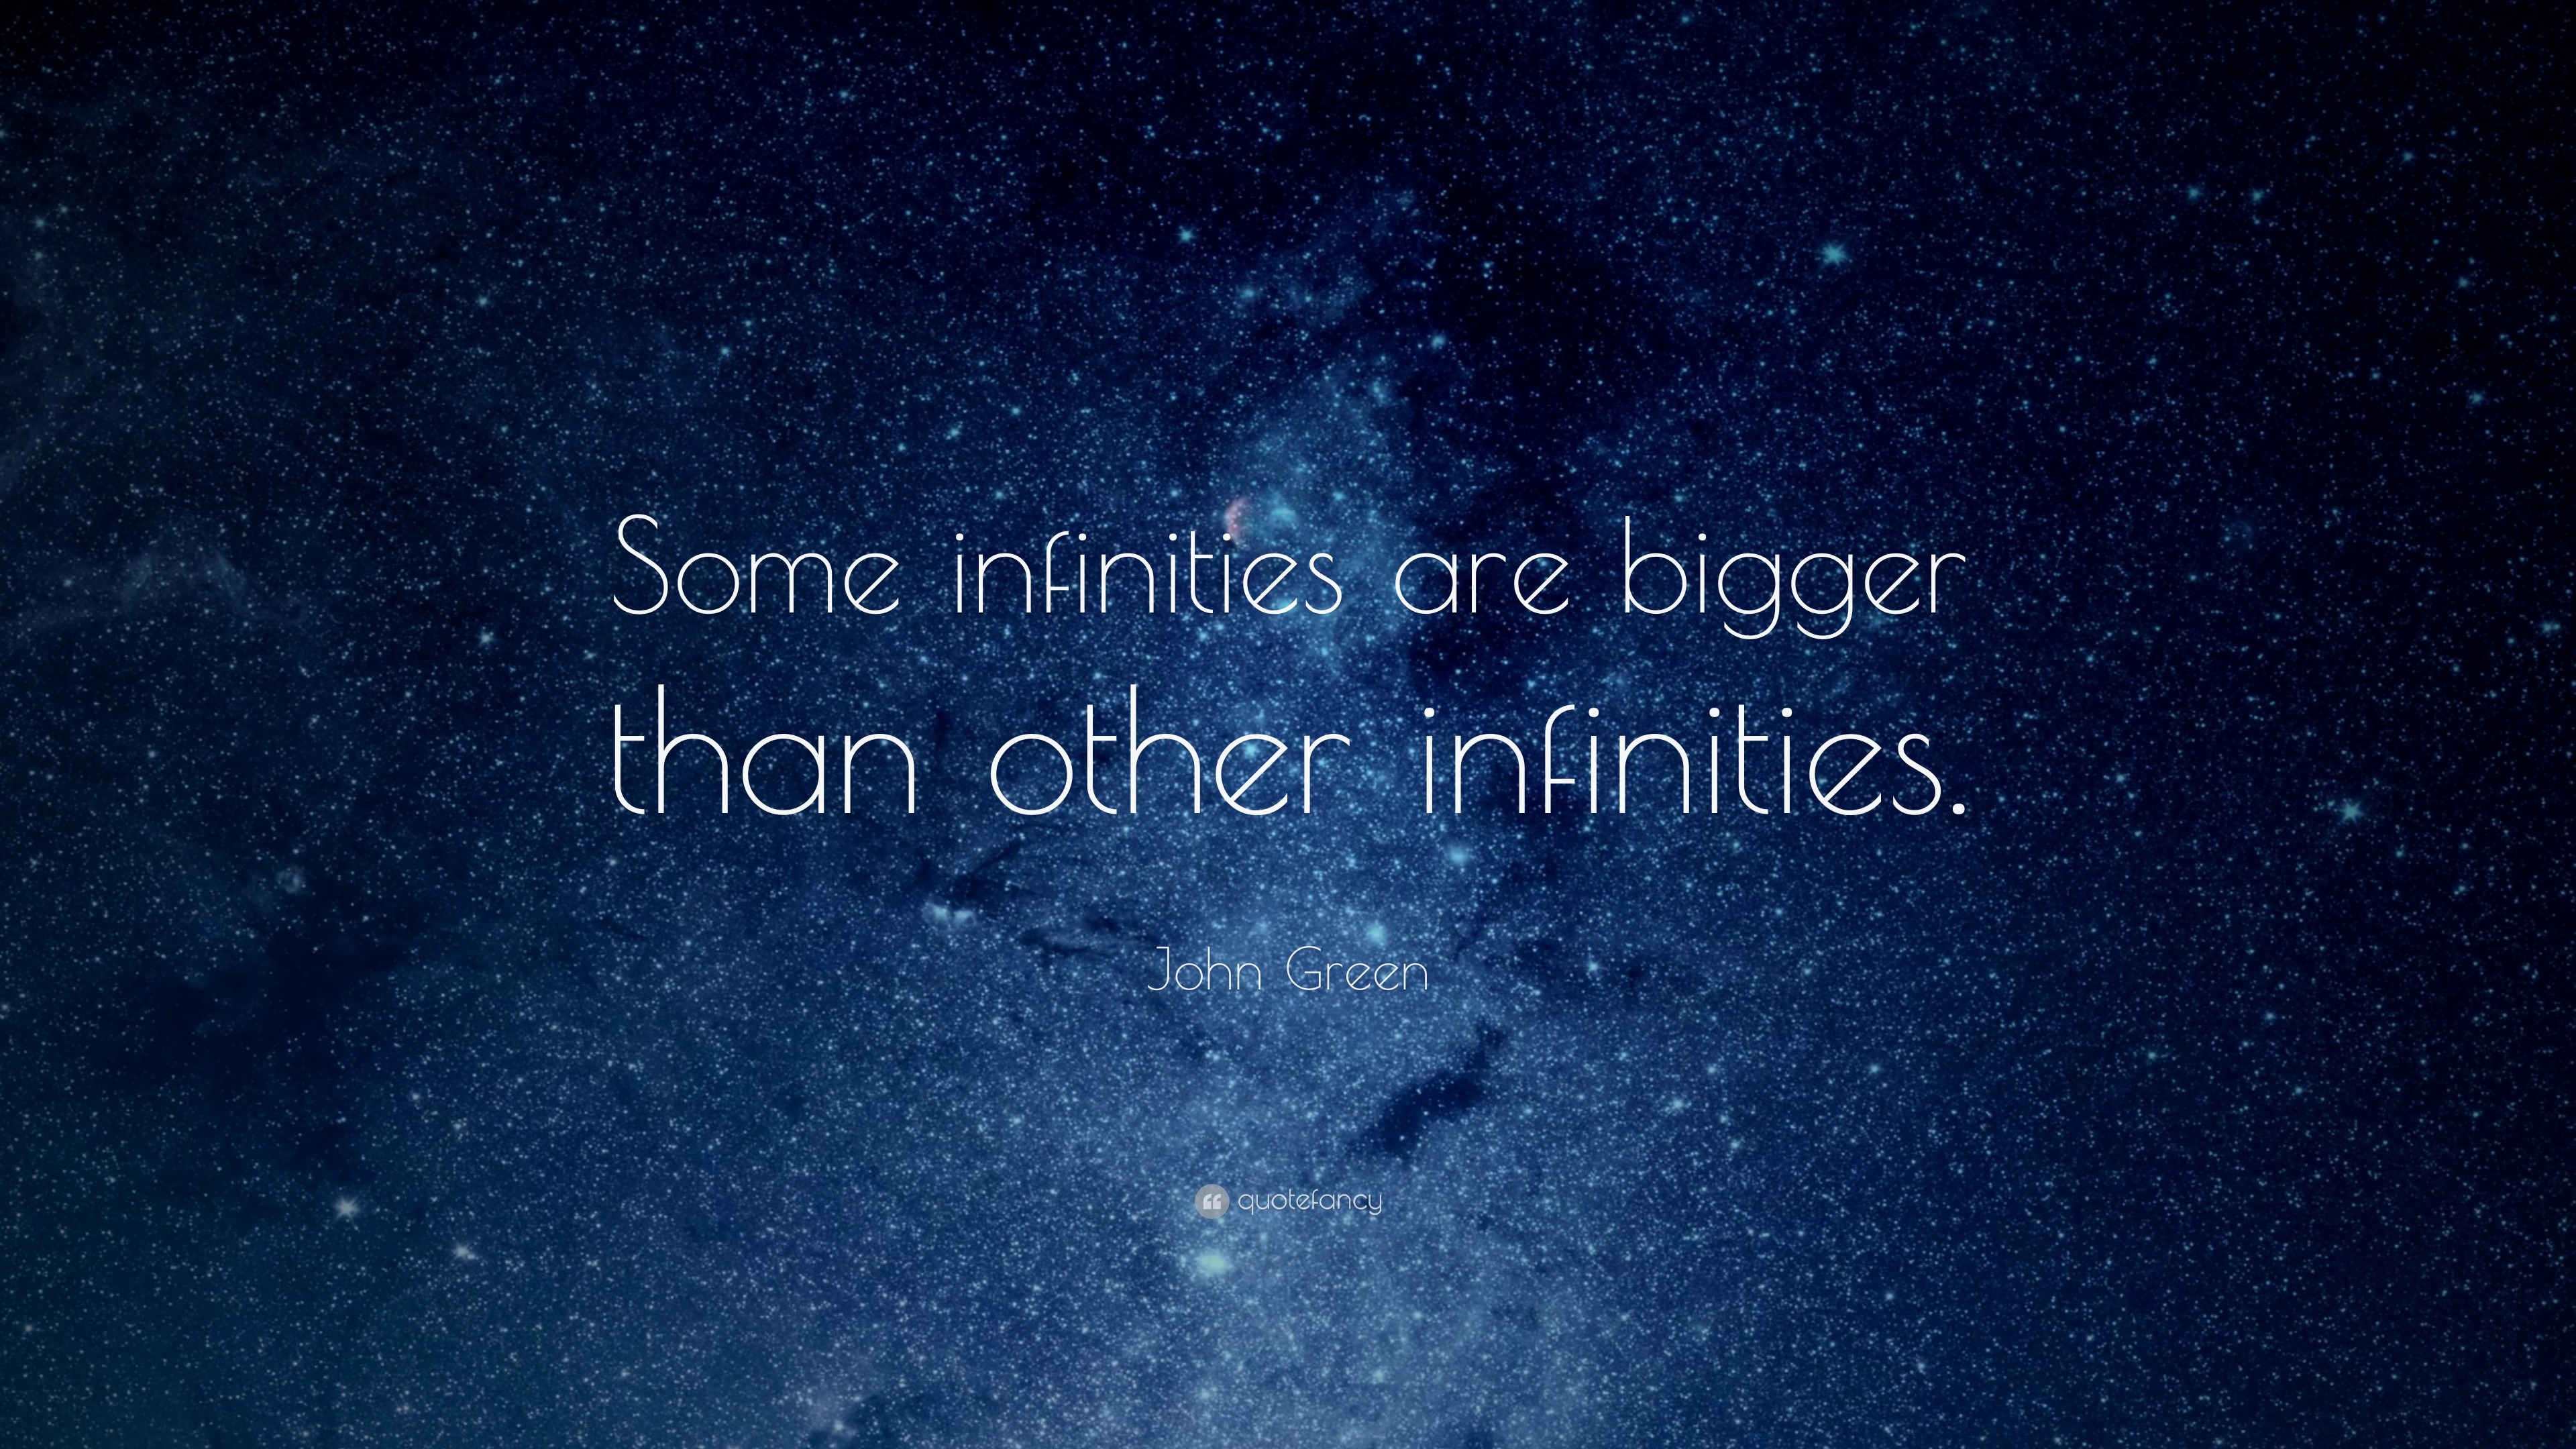 tumblr green quotes john Green John other than Quote: infinities bigger are â€œSome